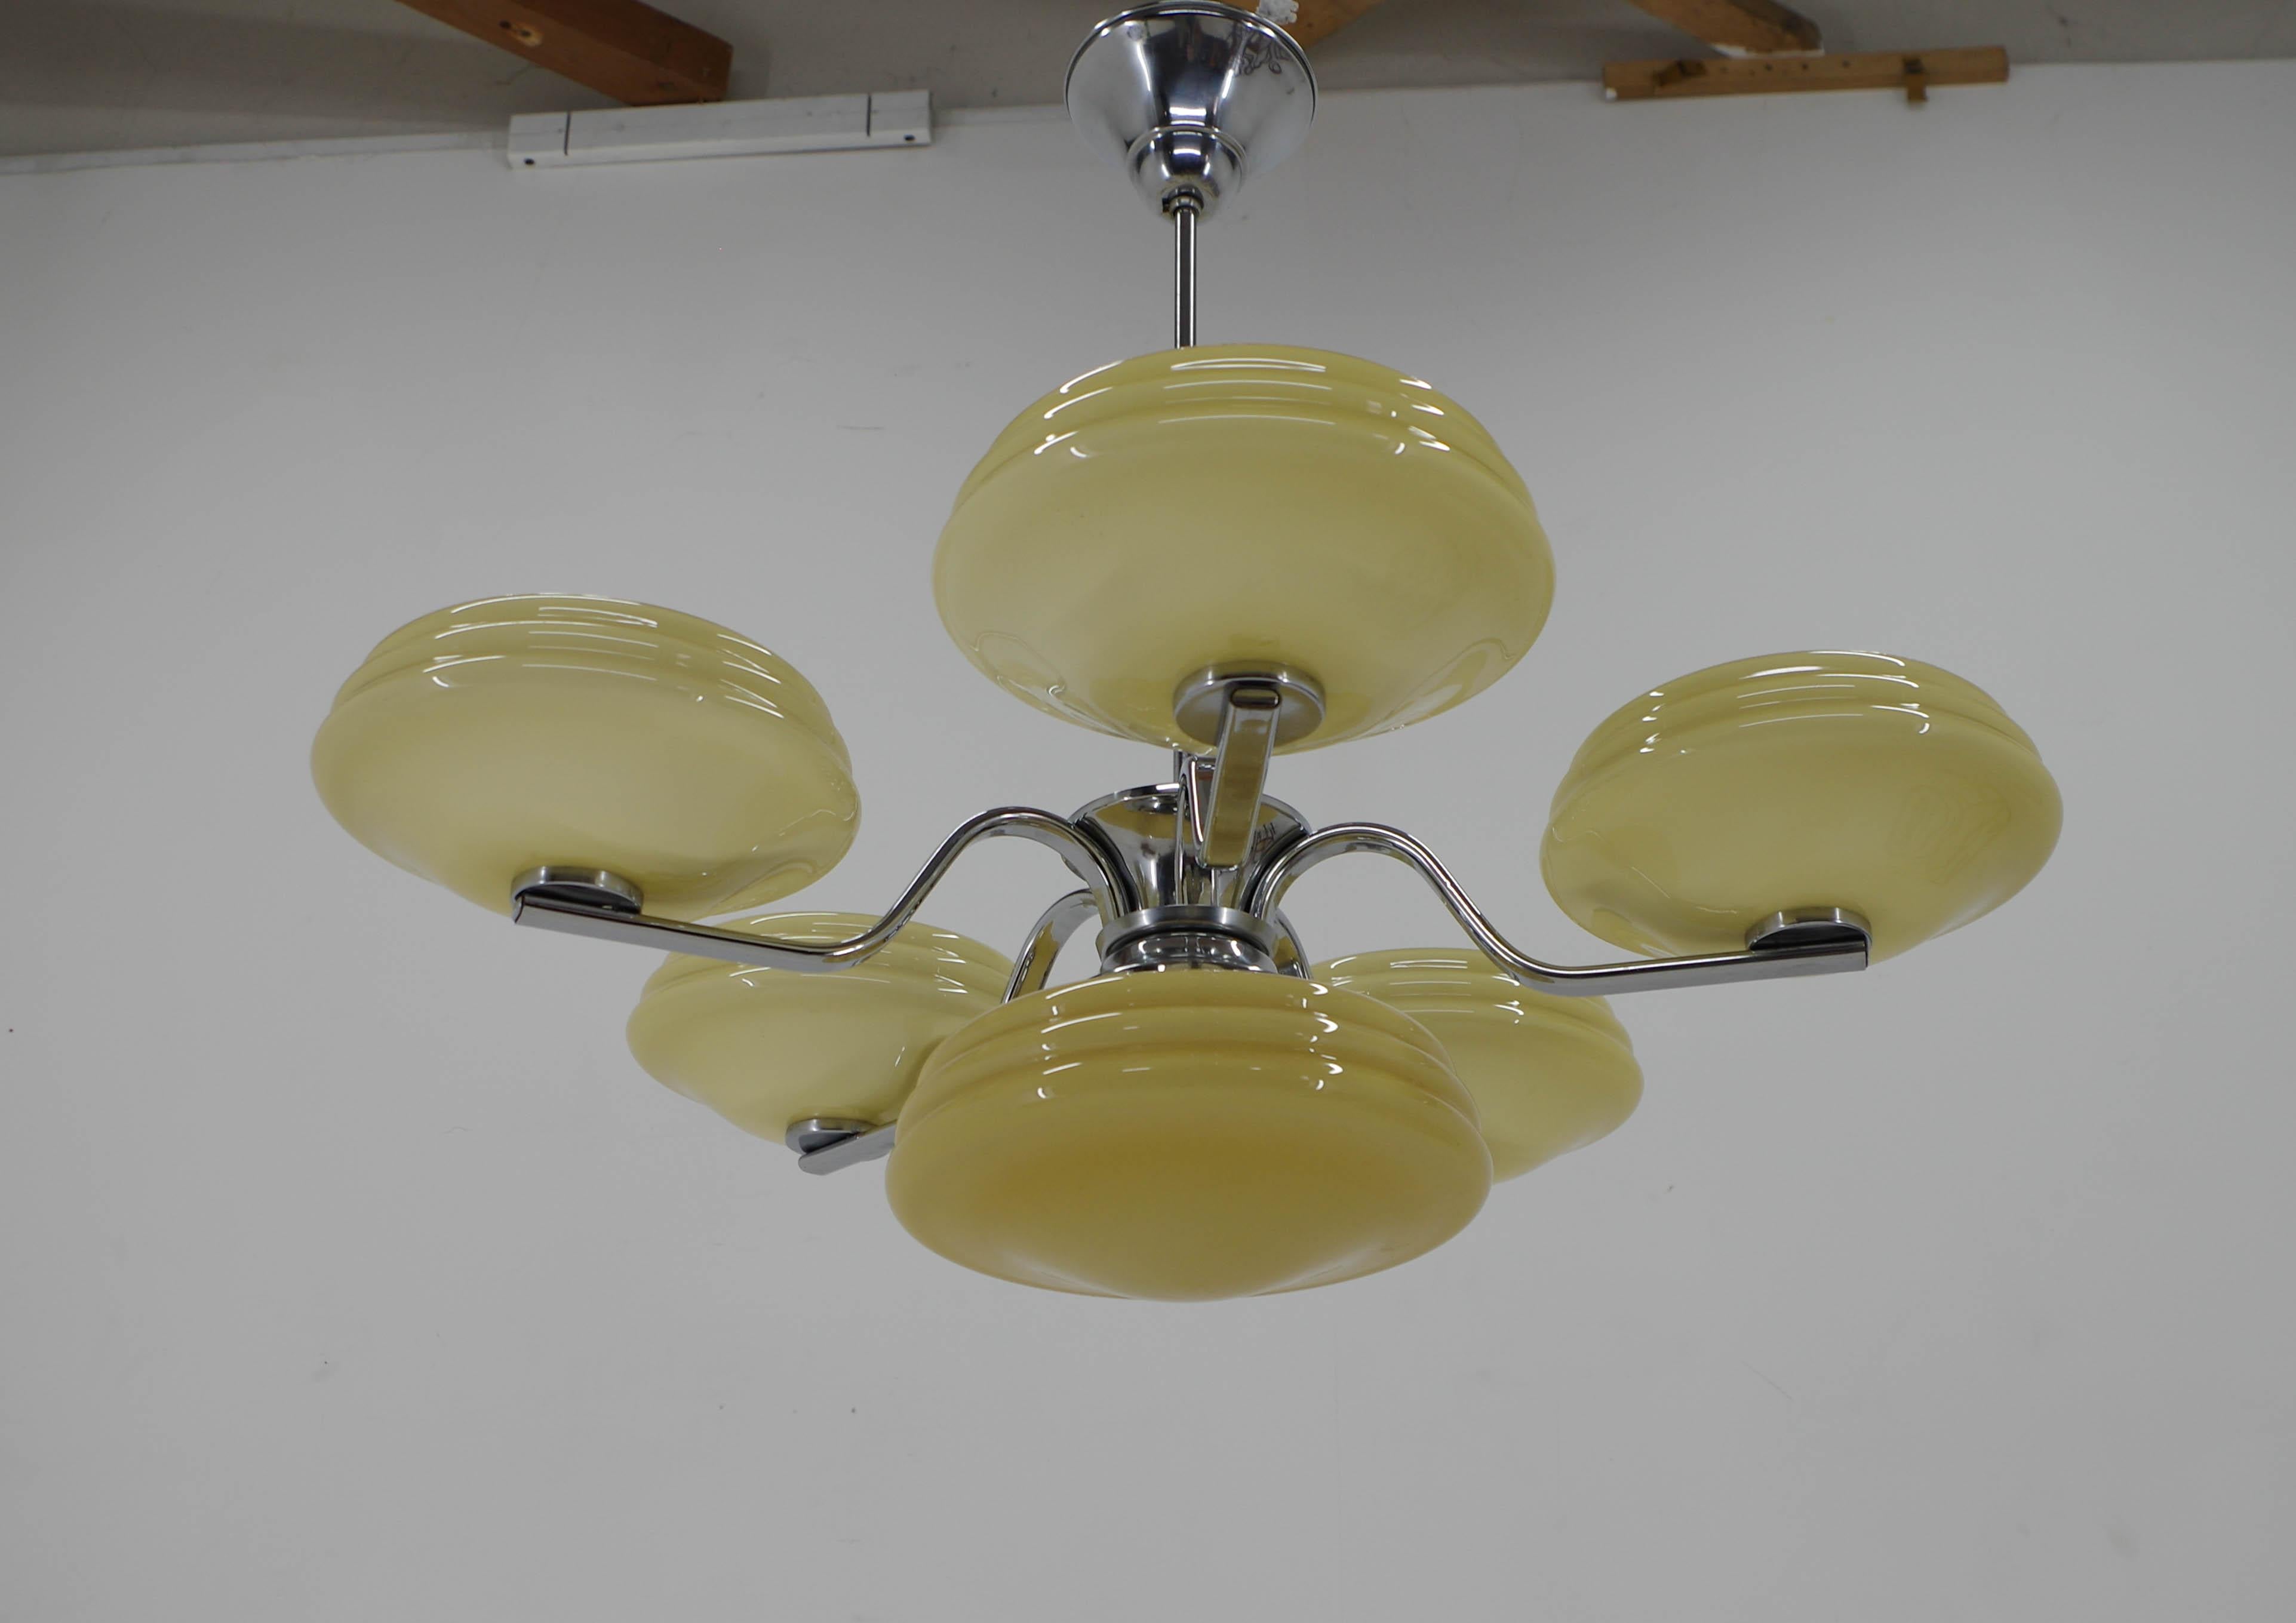 Art Deco chandelier made in 1940s in Czechoslovakia.
Restored, cleaned, polished
Rewired: two separate circuits - 1+5x60W, E25-E27 bulbs
US wiring compatible